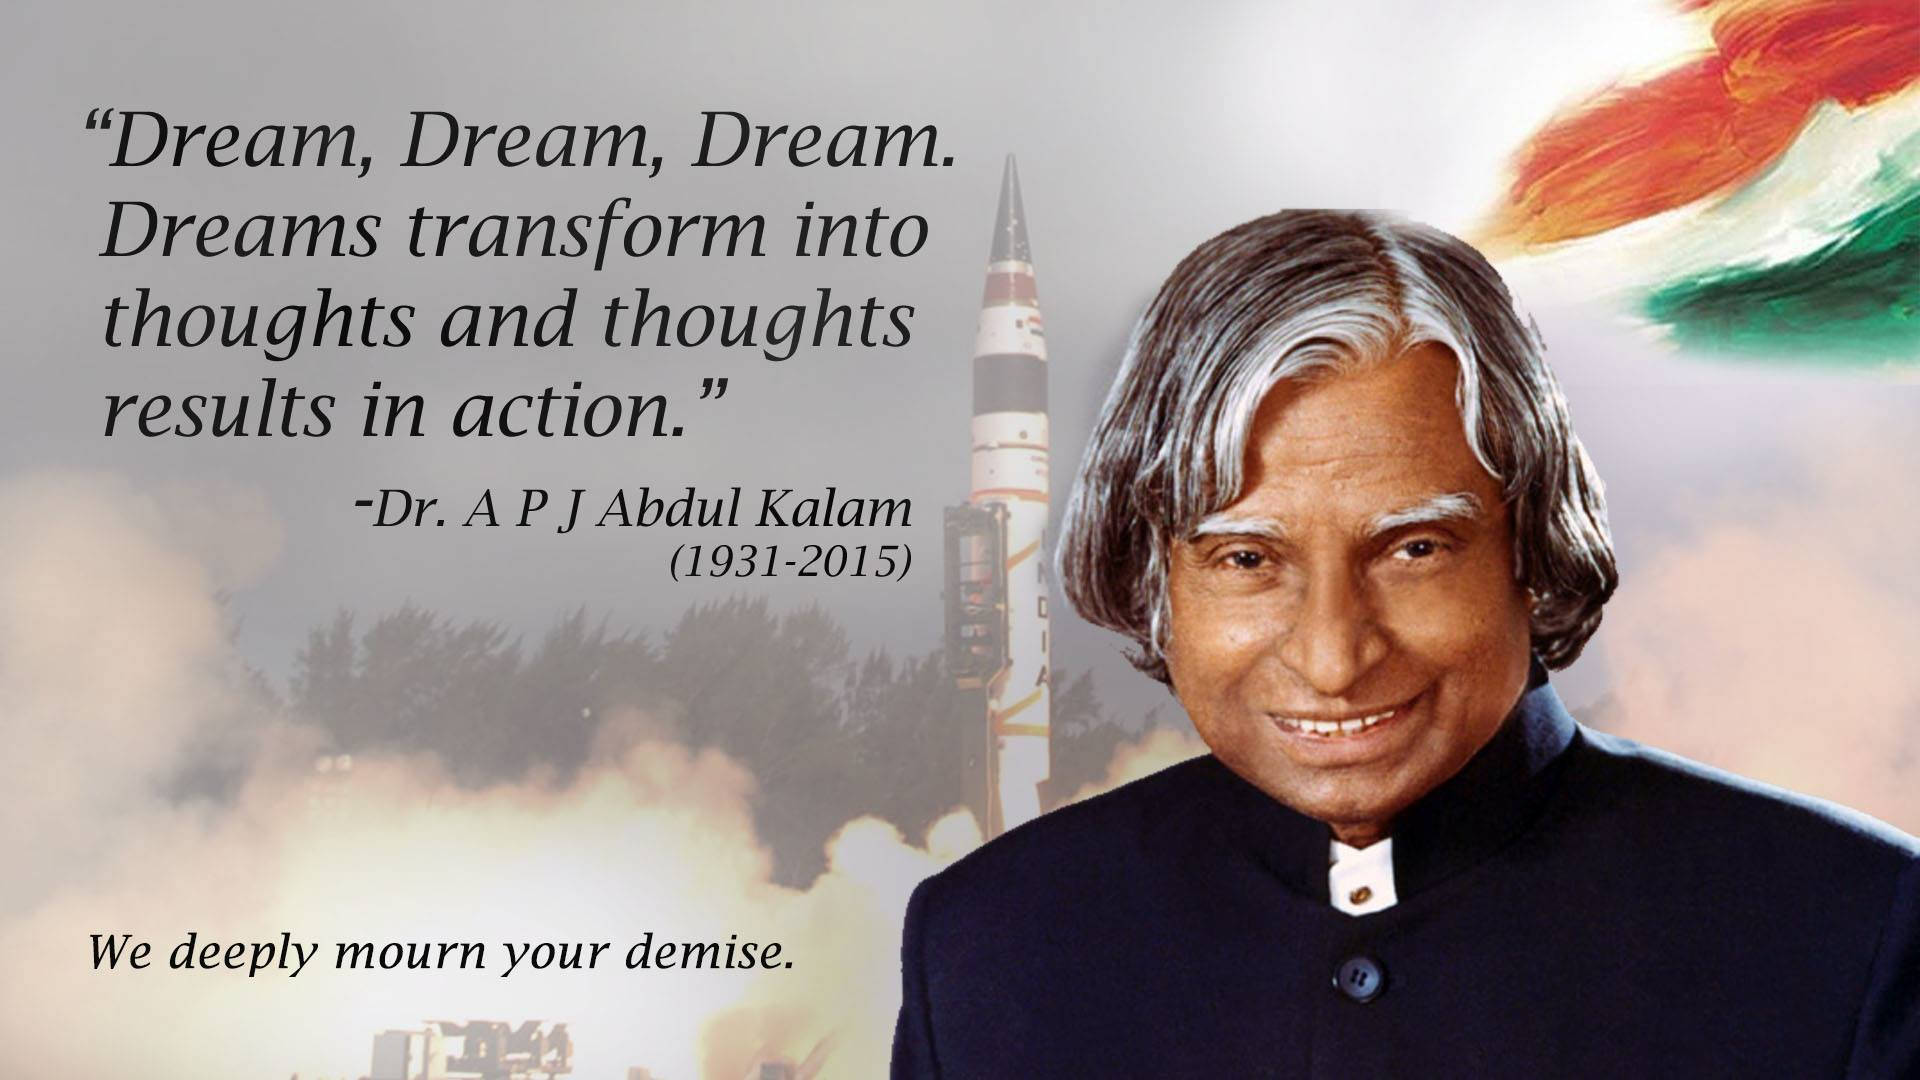 Abdul Kalam Hd Dream Thoughts Actions Background